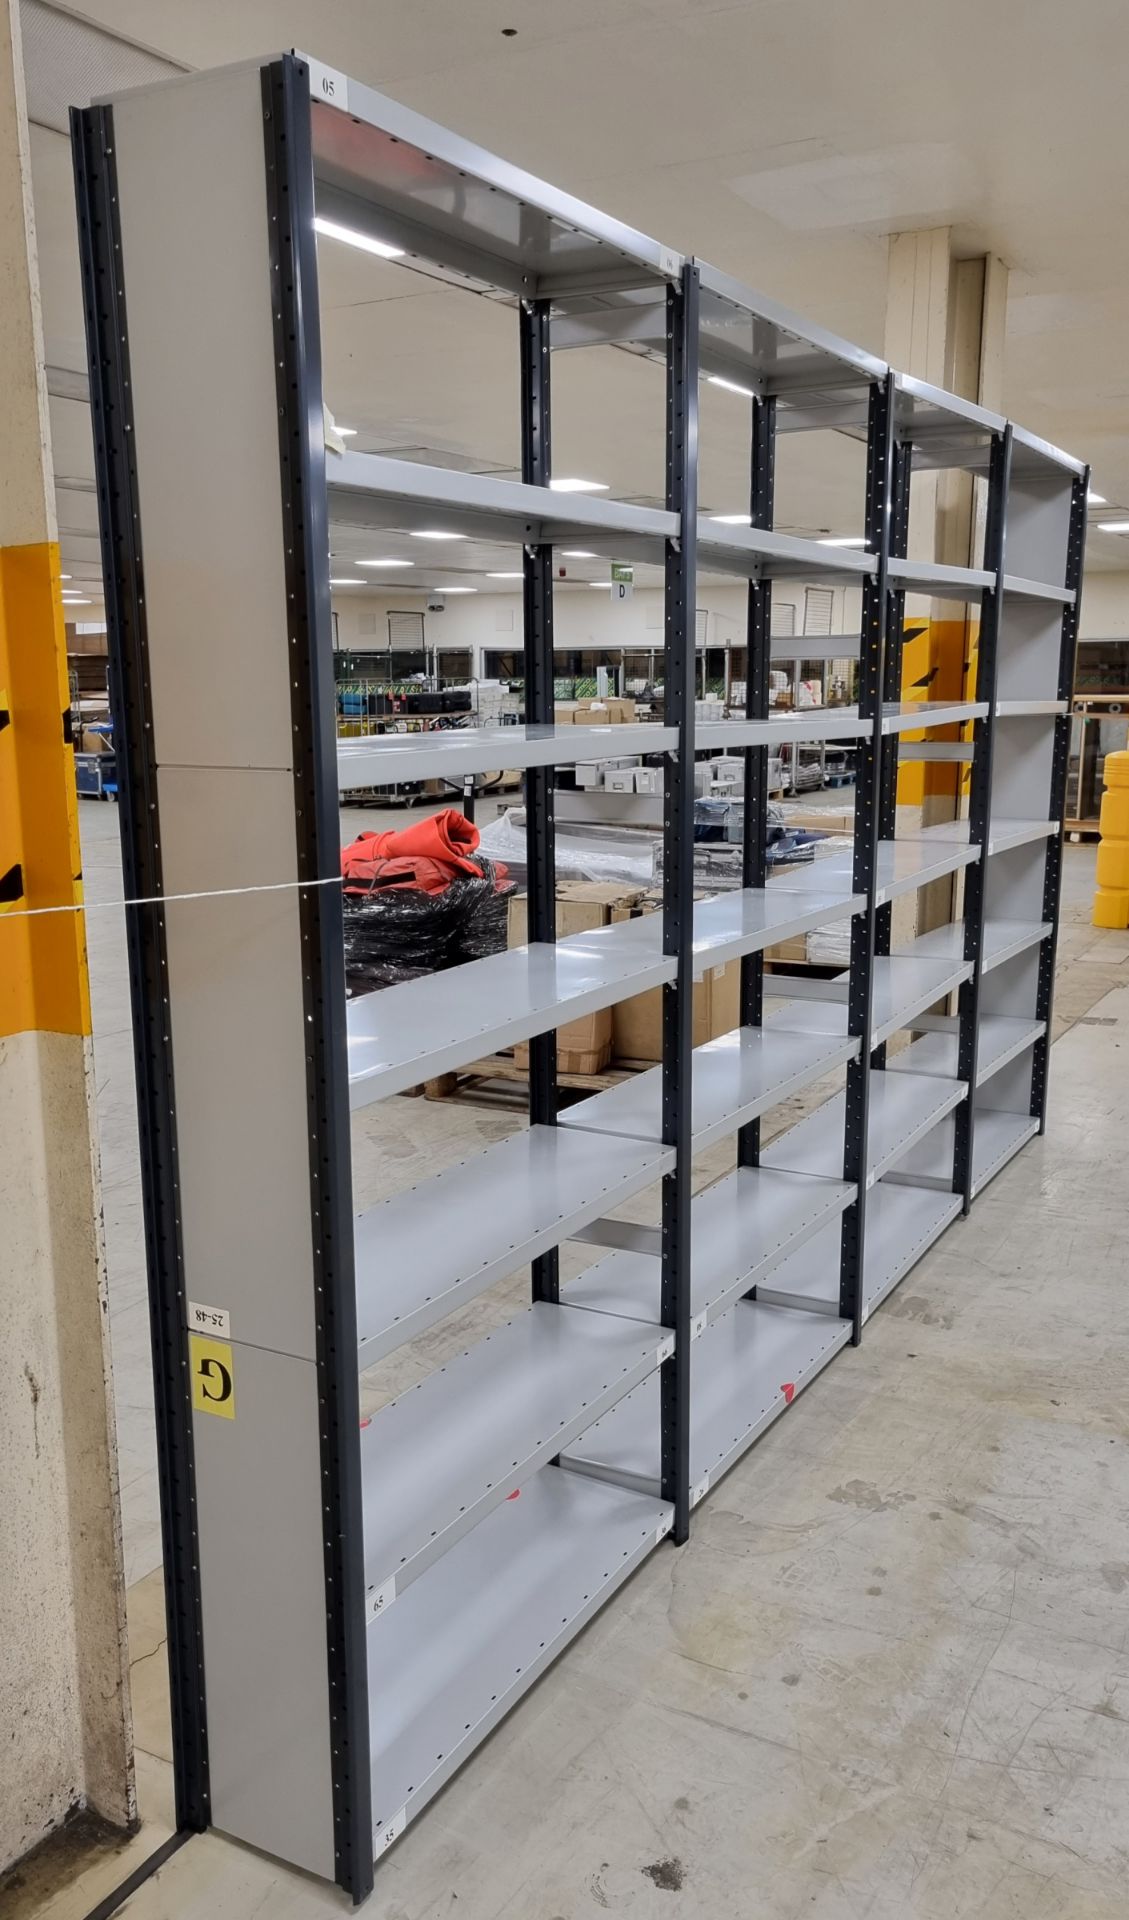 2x sets of Industrial 4 bay shelving assemblies - see description for details - Image 4 of 6